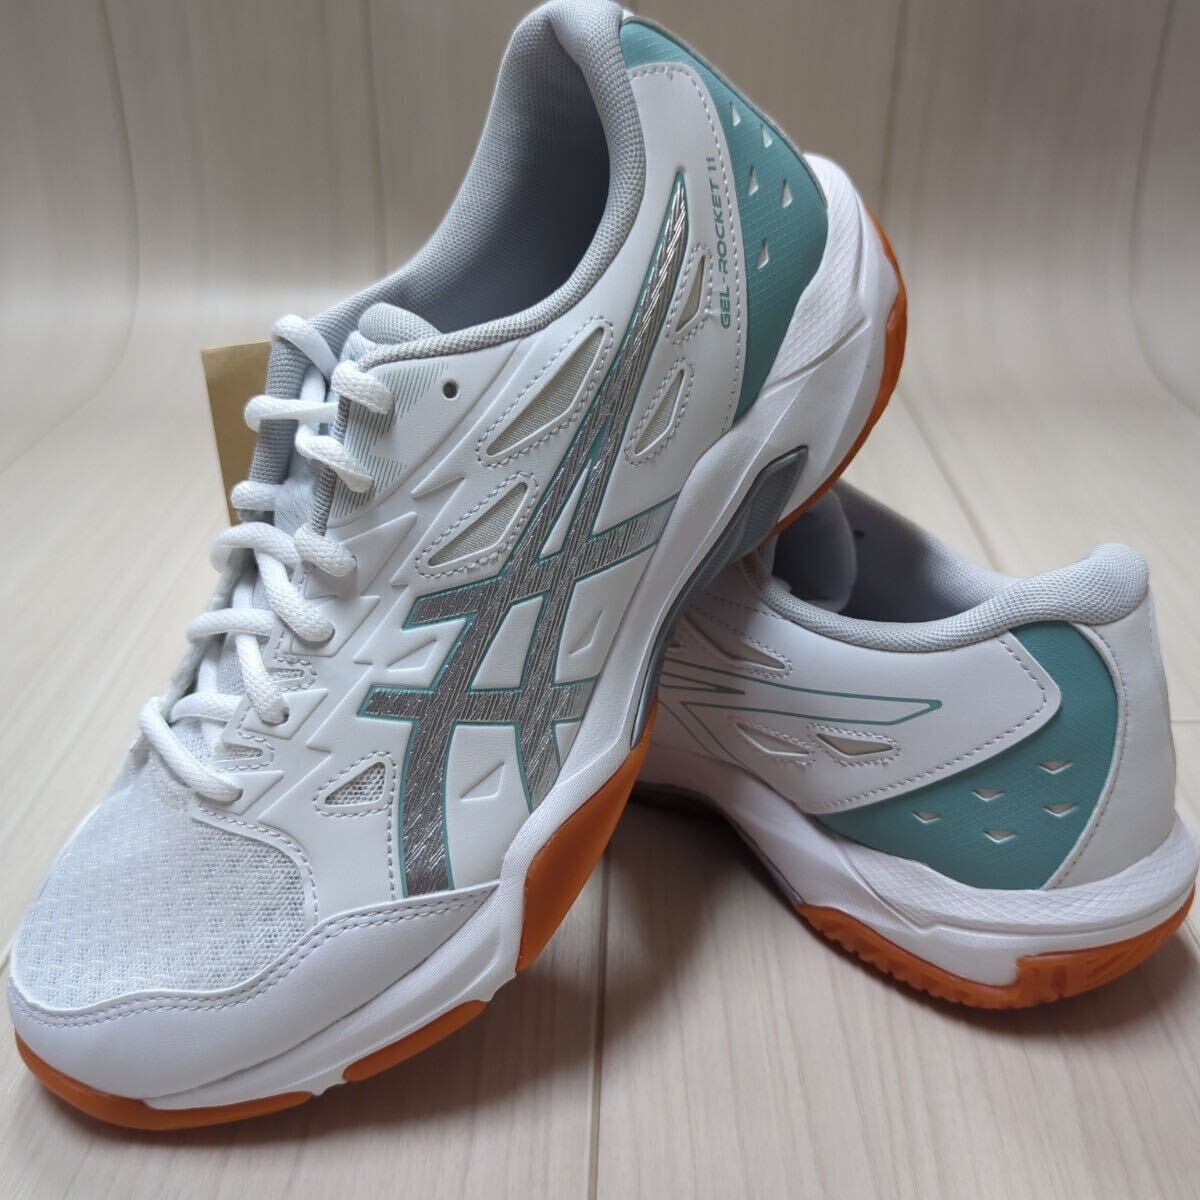  Asics volleyball shoes gel - Rocket 11 1073A065-102 25.5cm unused new goods 